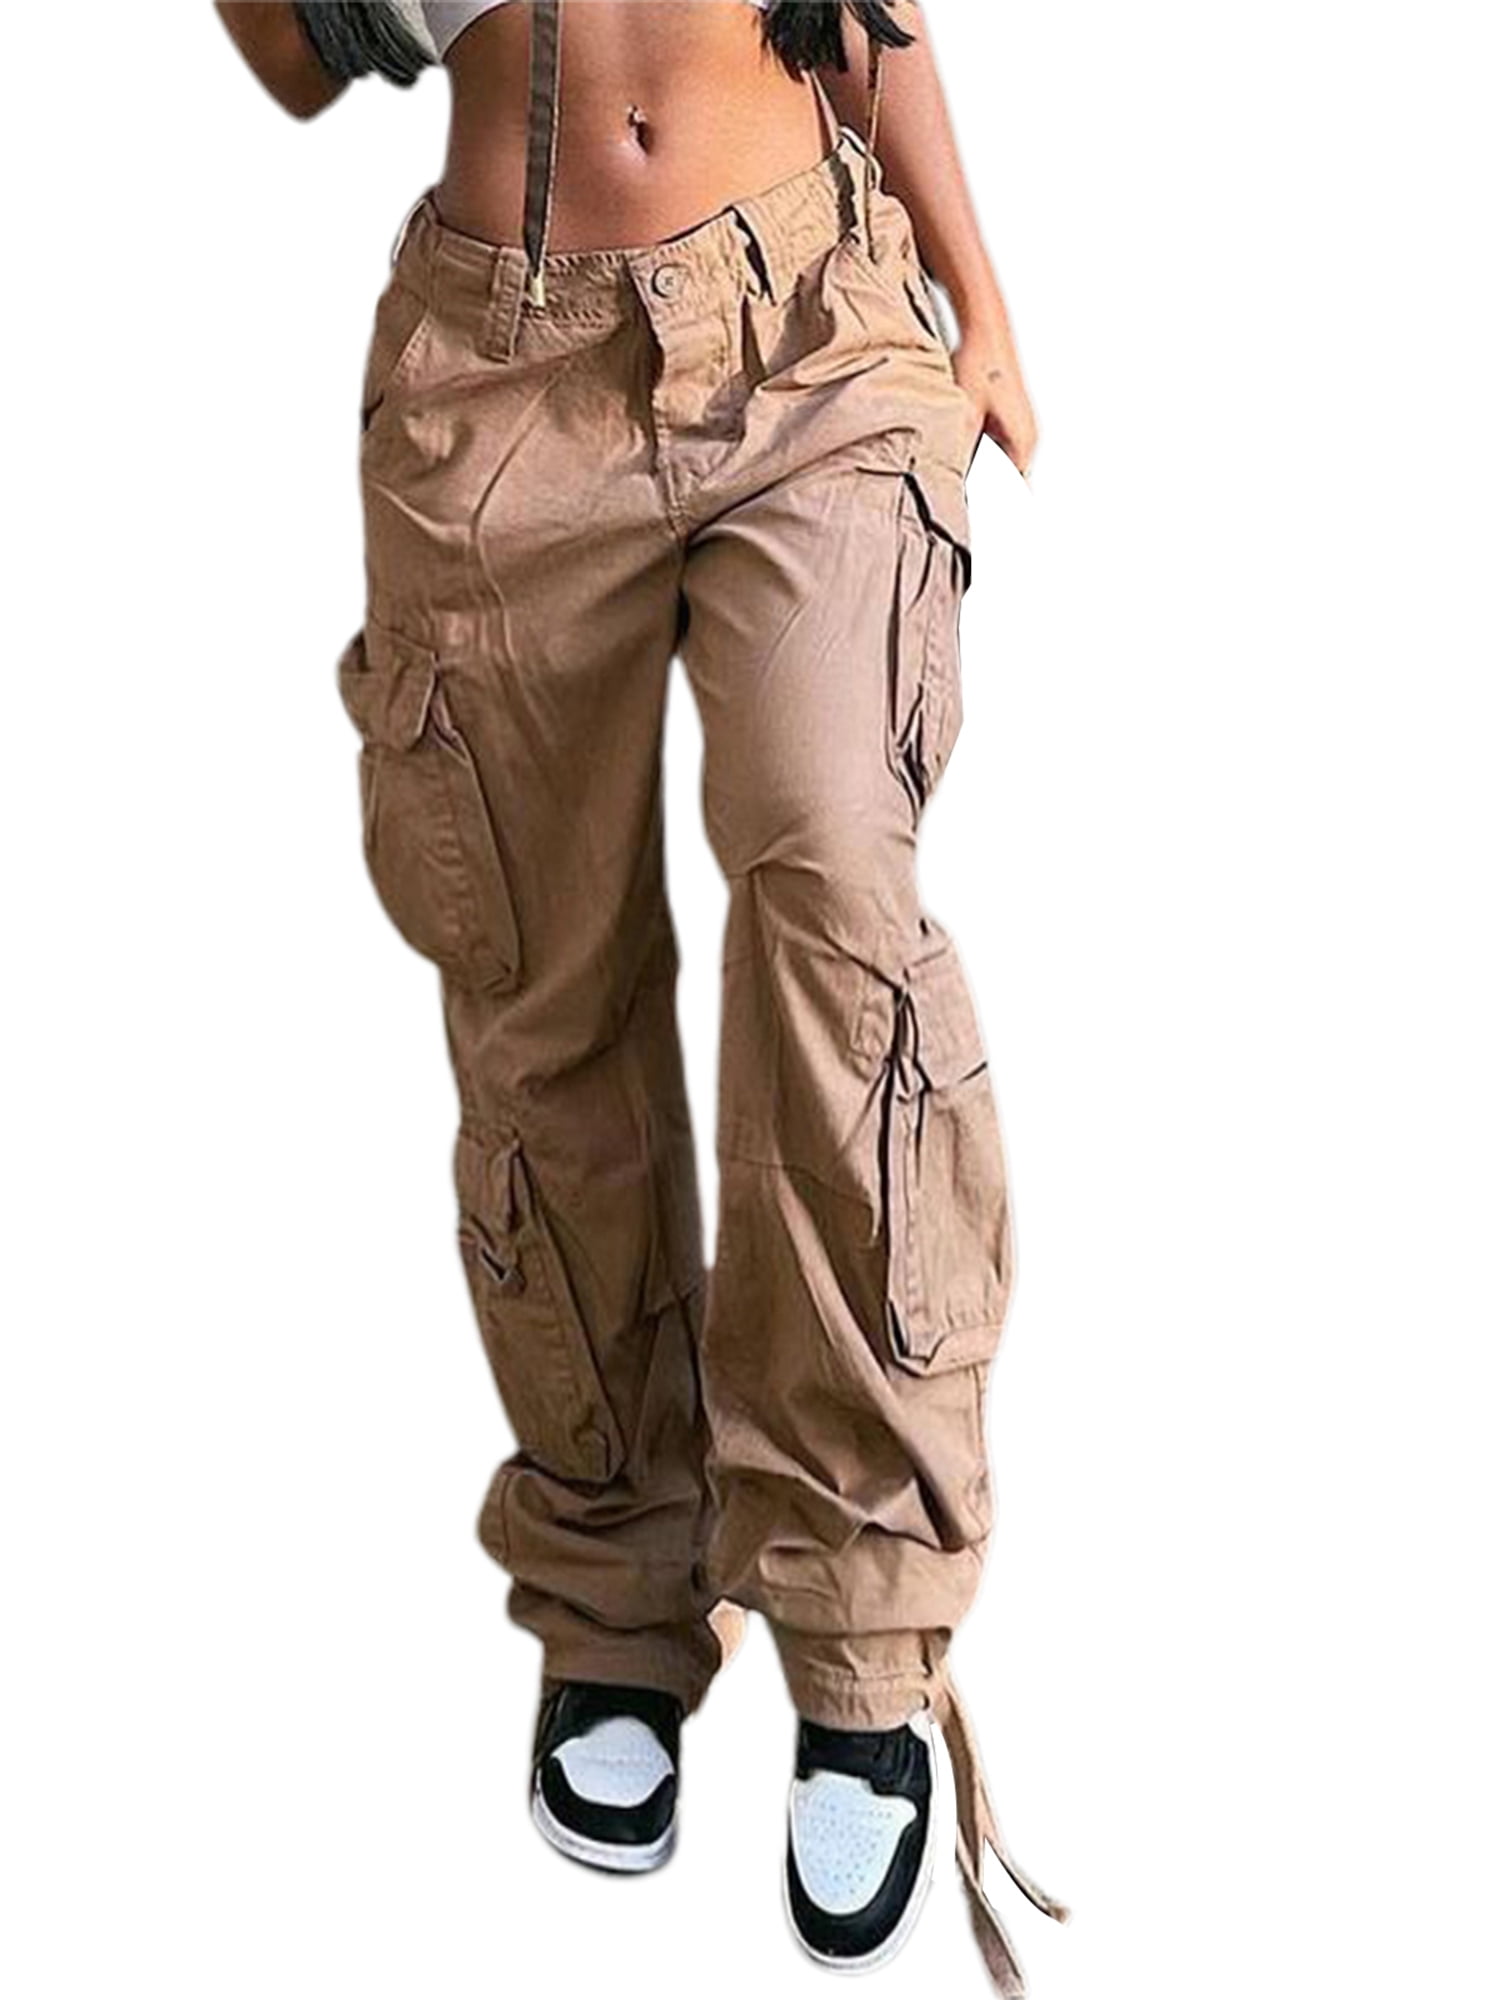 1,724 Cargo Pants Girl Royalty-Free Photos and Stock Images | Shutterstock